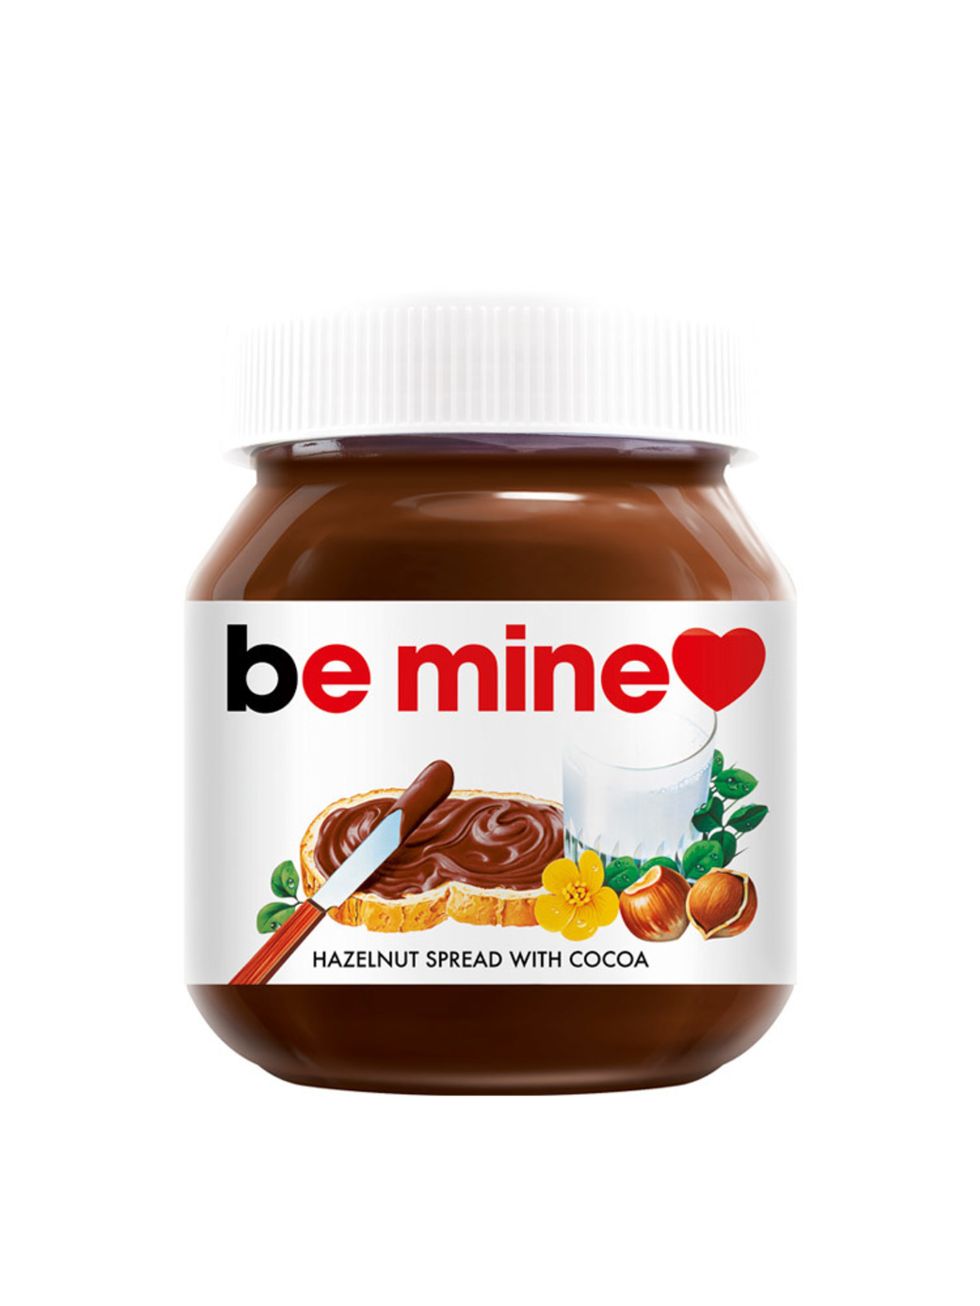 <p>Personalised Nutella, £3.99 at <a href="http://www.selfridges.com/content/article/personalised-nutella-available-store" target="_blank">Selfridges</a></p>